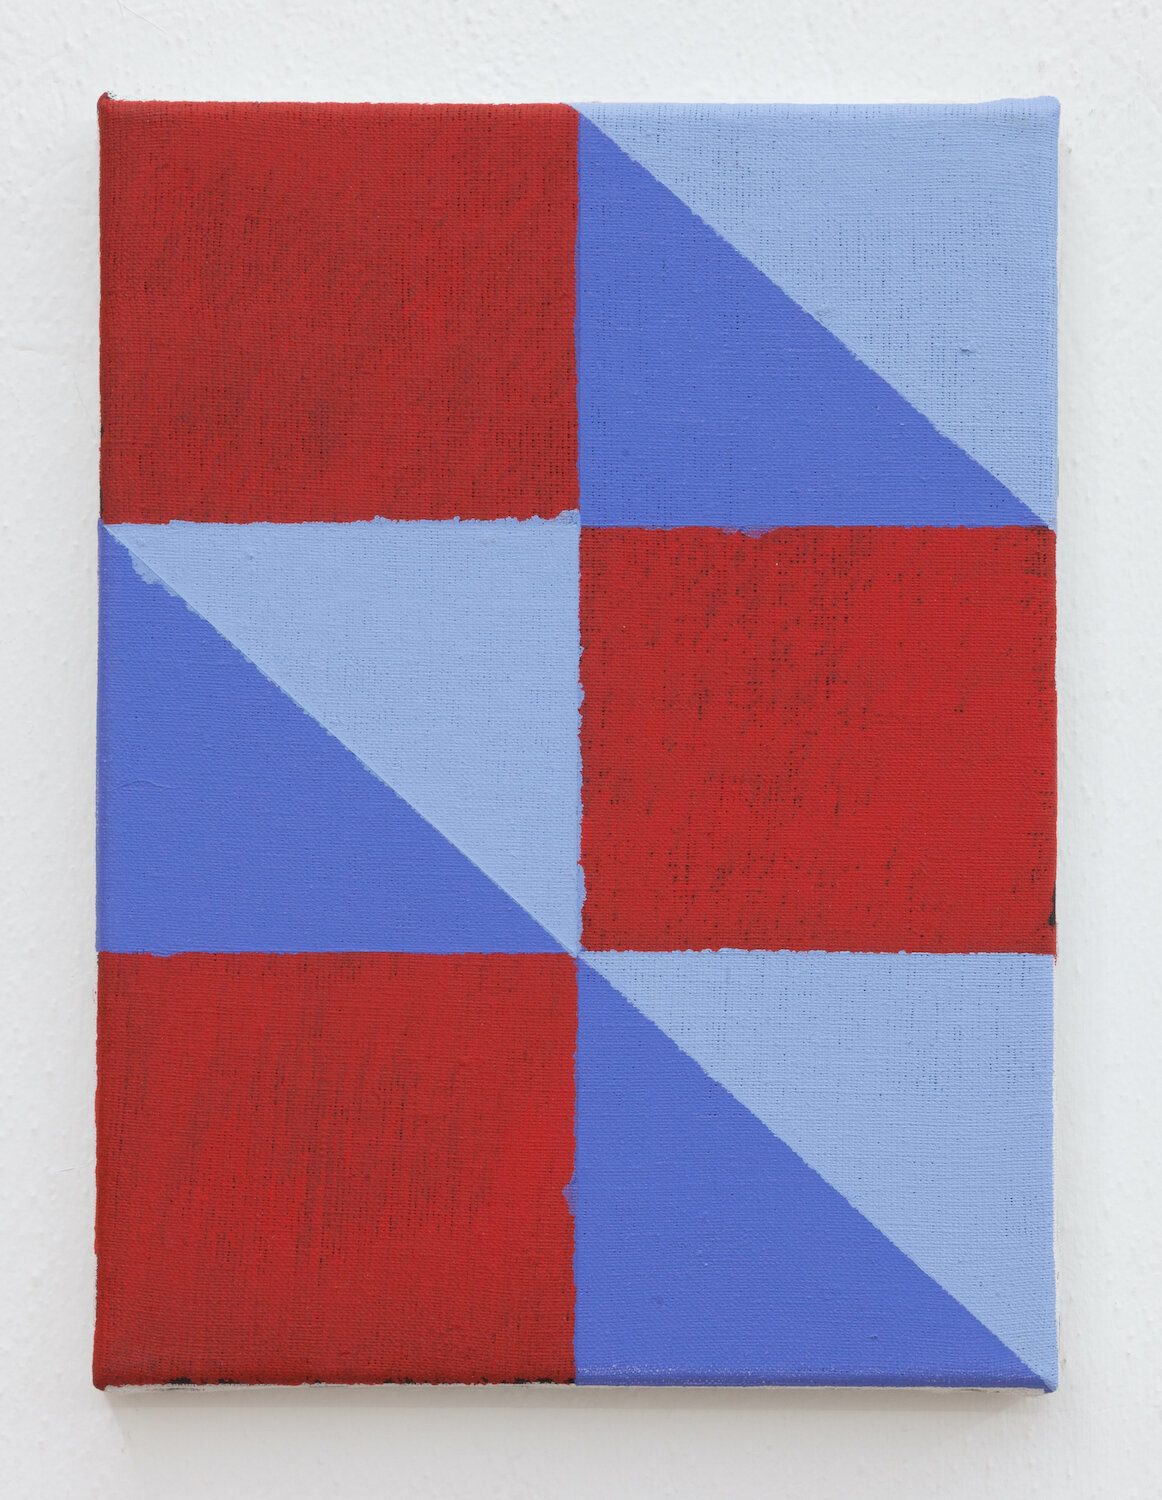  Joshua Abelow,  Untitled (Abstraction “HBB”),  2019, Oil on linen, 12 x 9 inches 